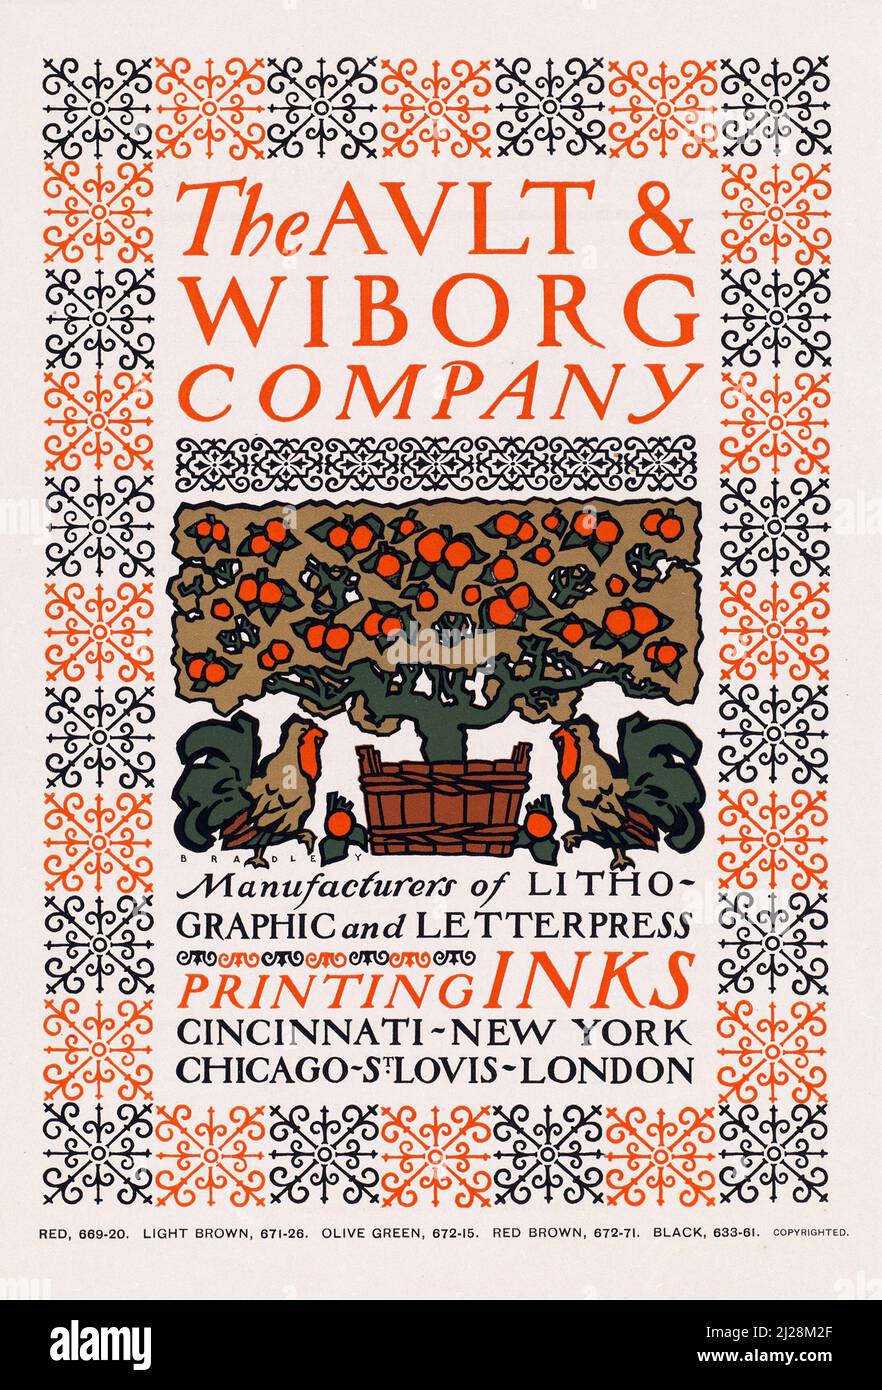 Will Bradley Artwork - The Ault and Wiborg company (ca. 1890s) American Art Nouveau - Old and vintage Poster Stockfoto